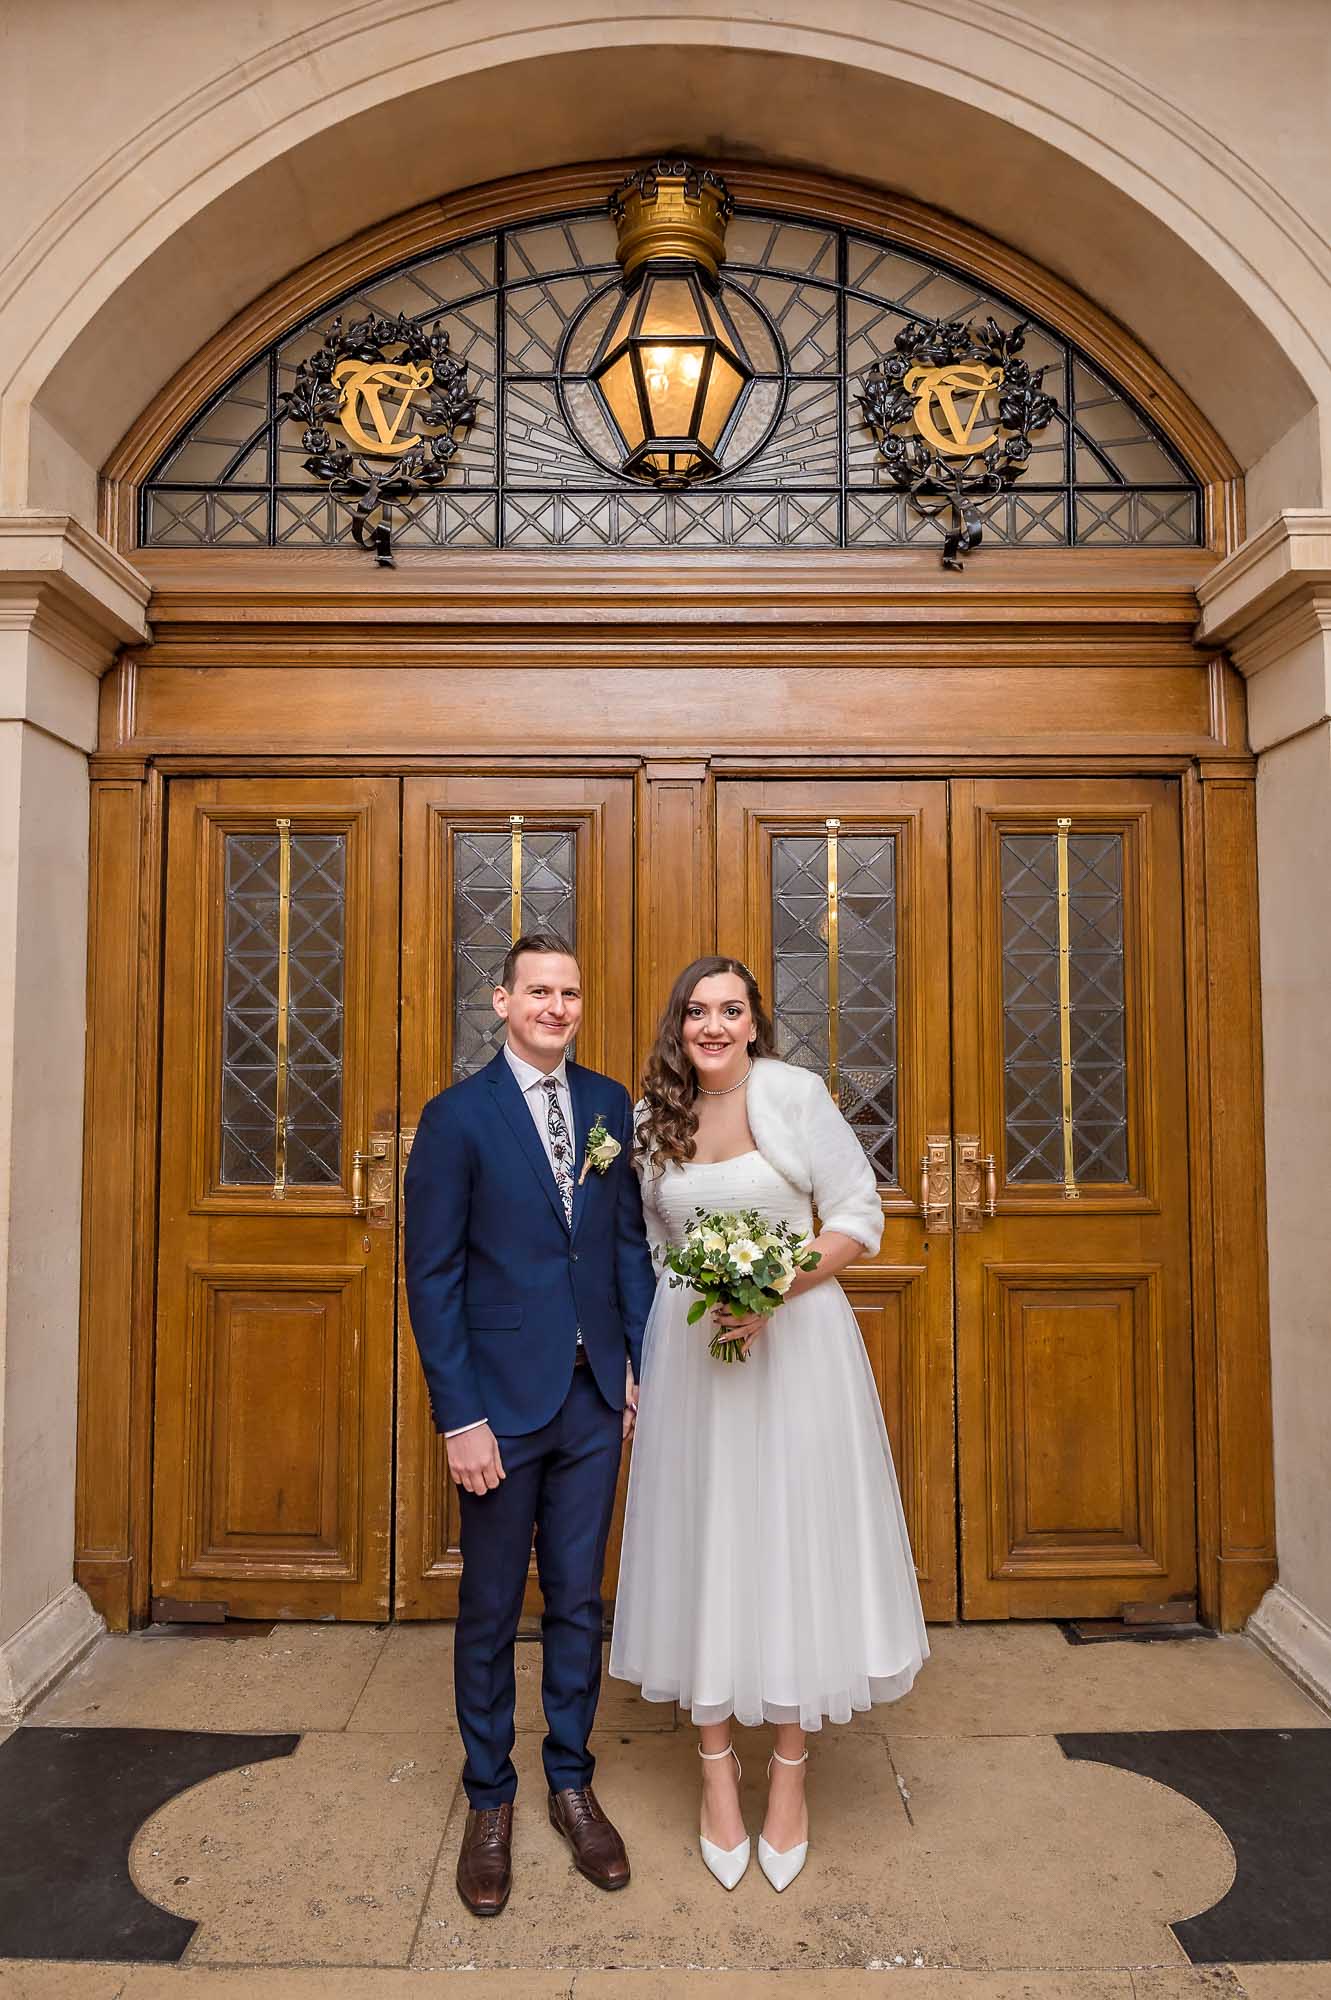 The bride and groom pose inside the front doors of Cardiff City Hall